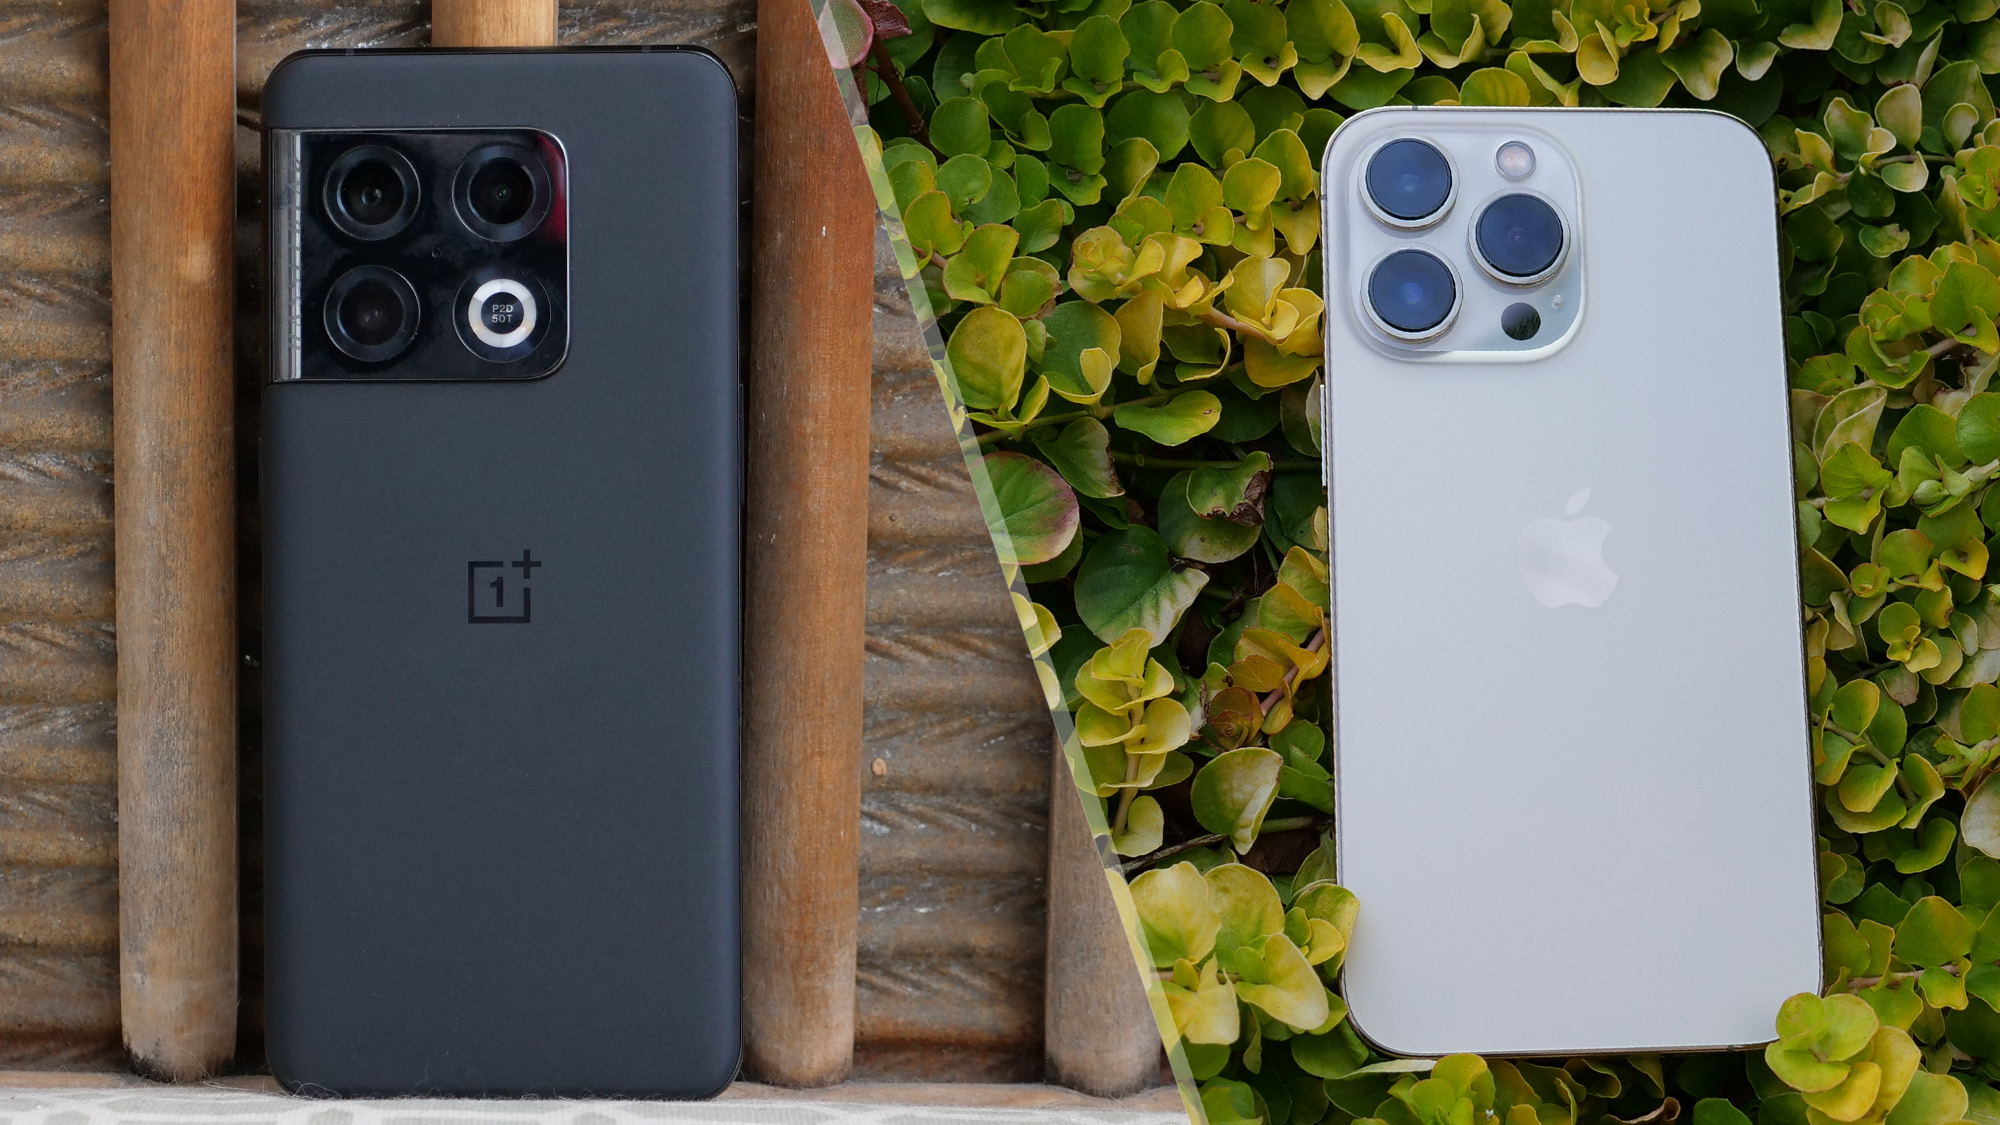 OnePlus 10 Pro vs. iPhone 13 Pro: Which phone is best?